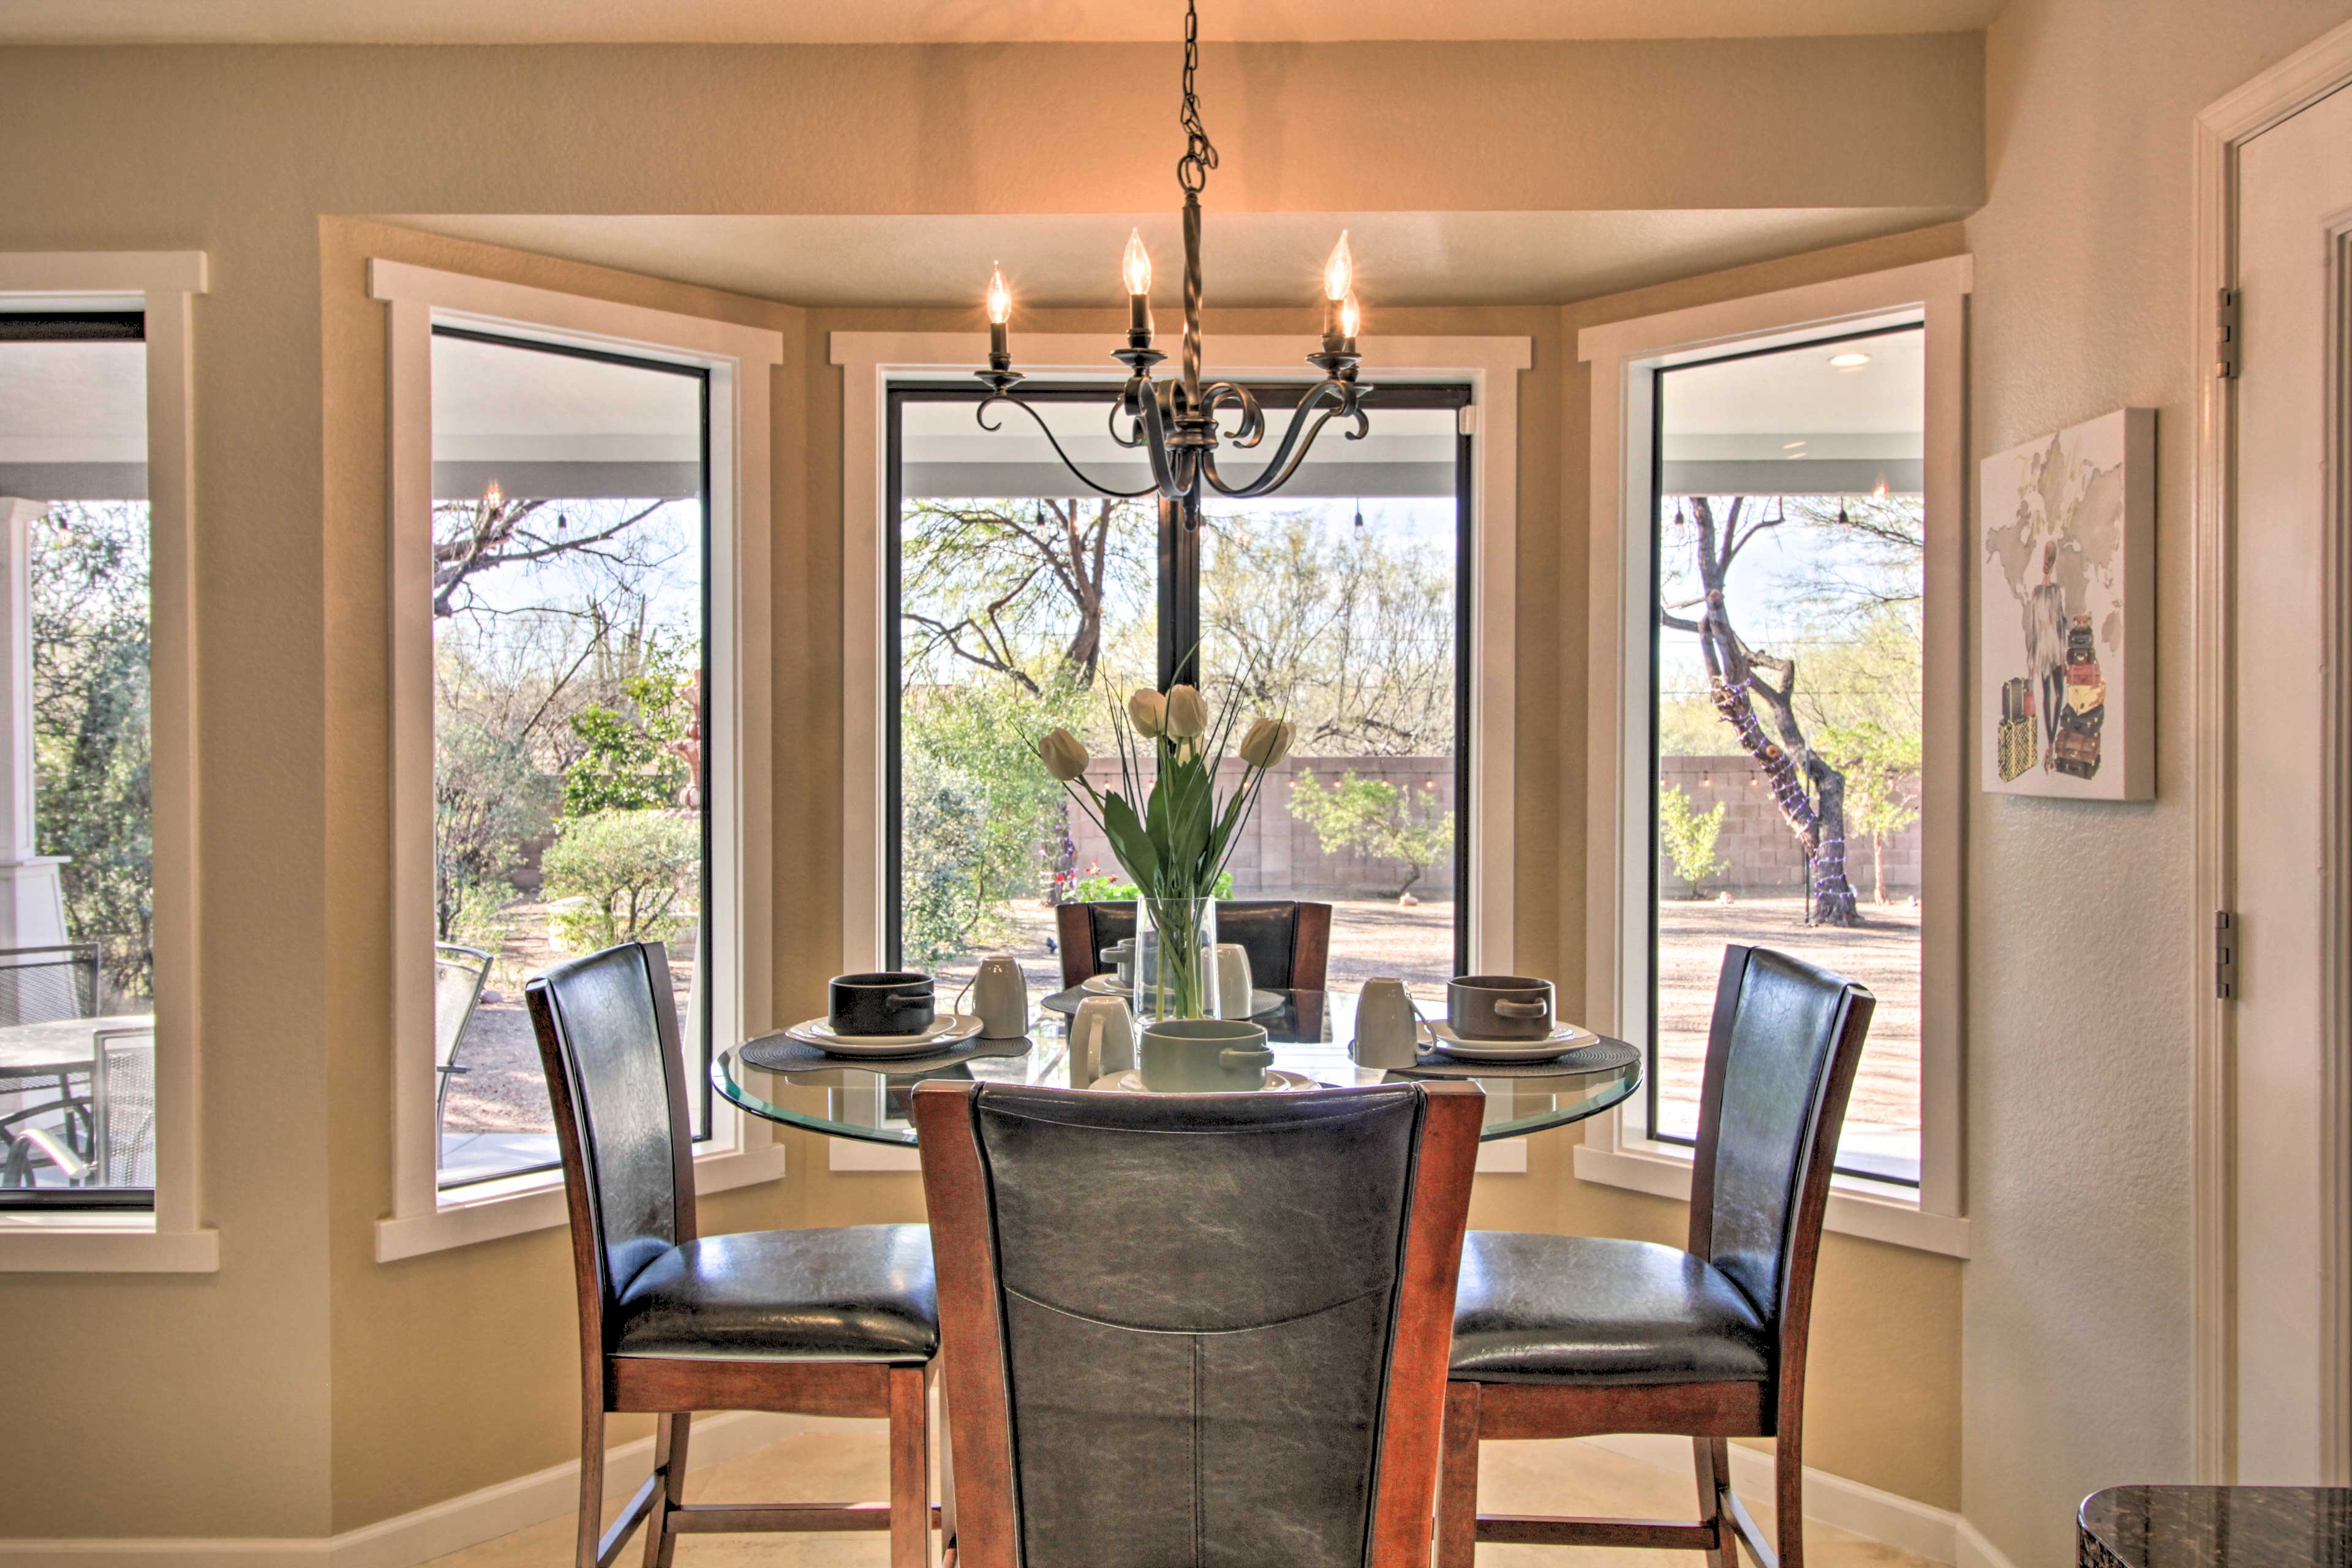 Additional Dining Area | Breakfast Table